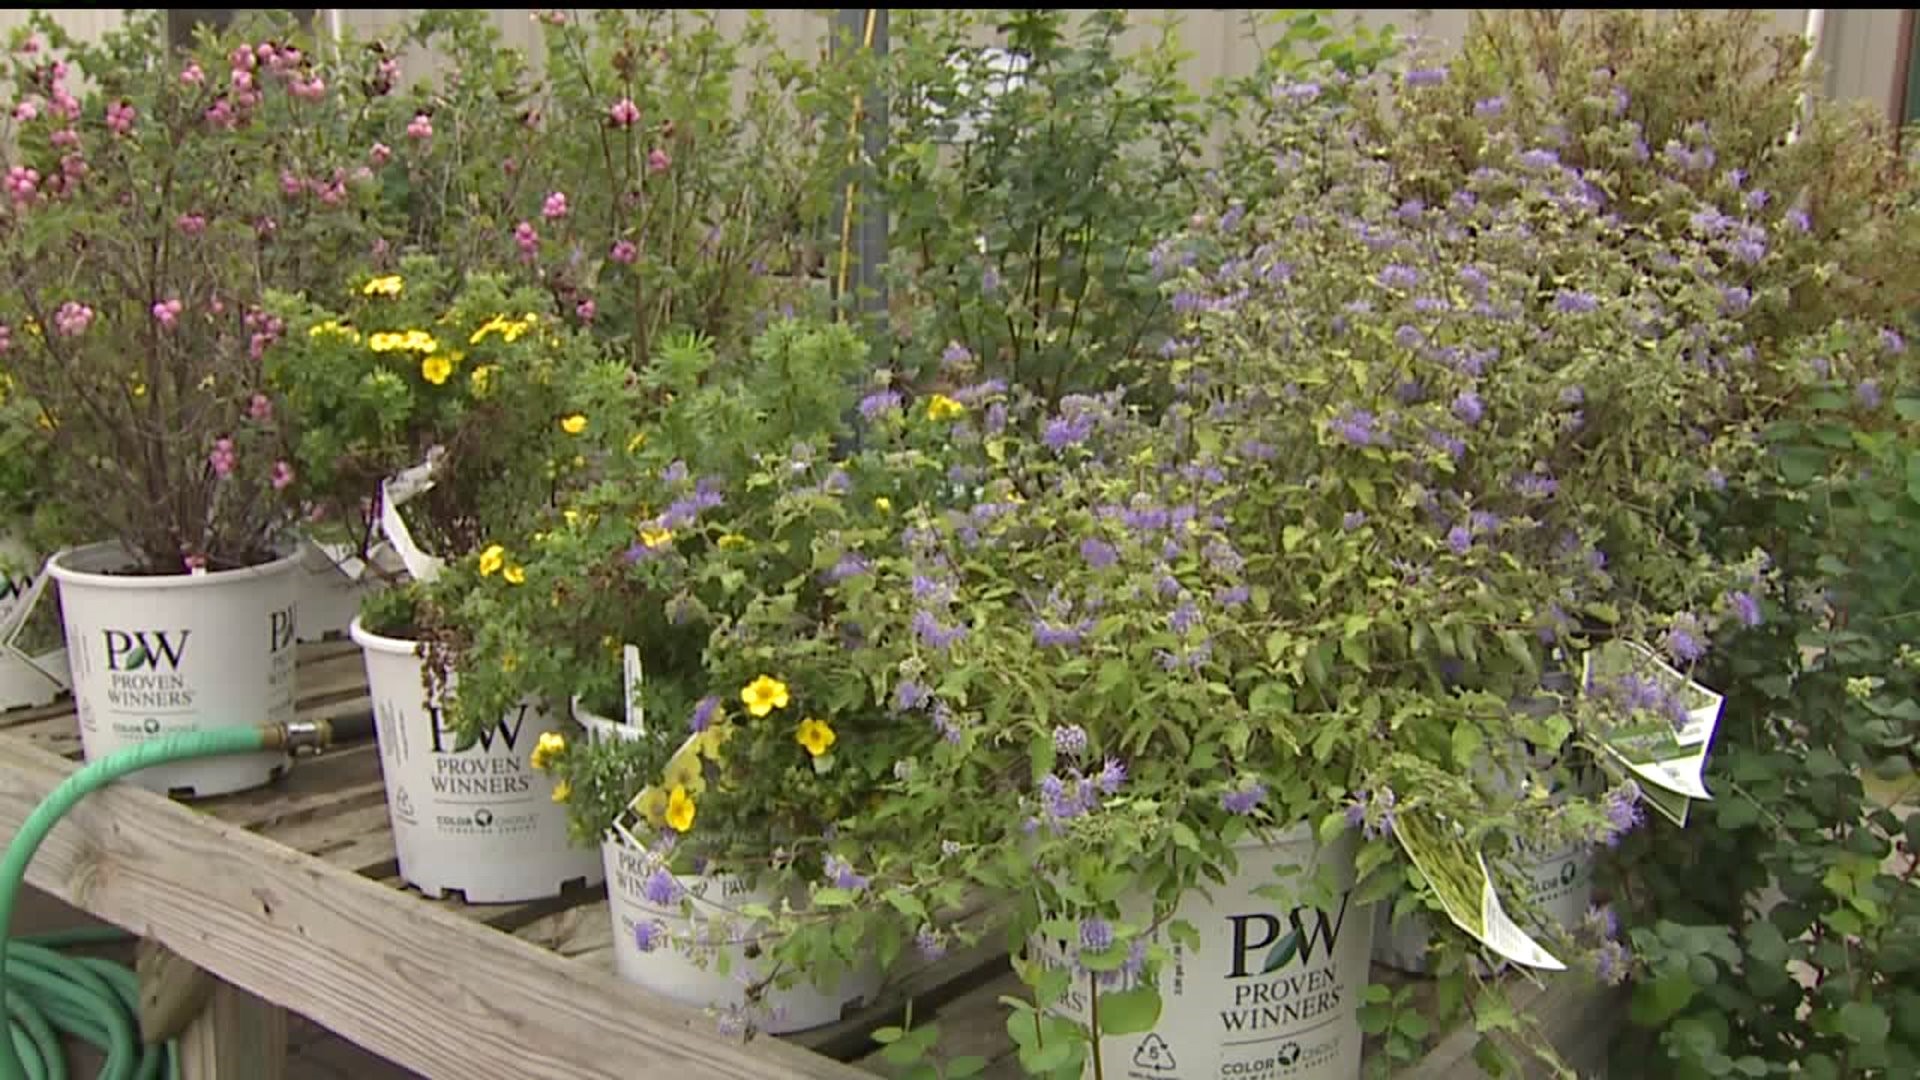 Growing season could end this weekend